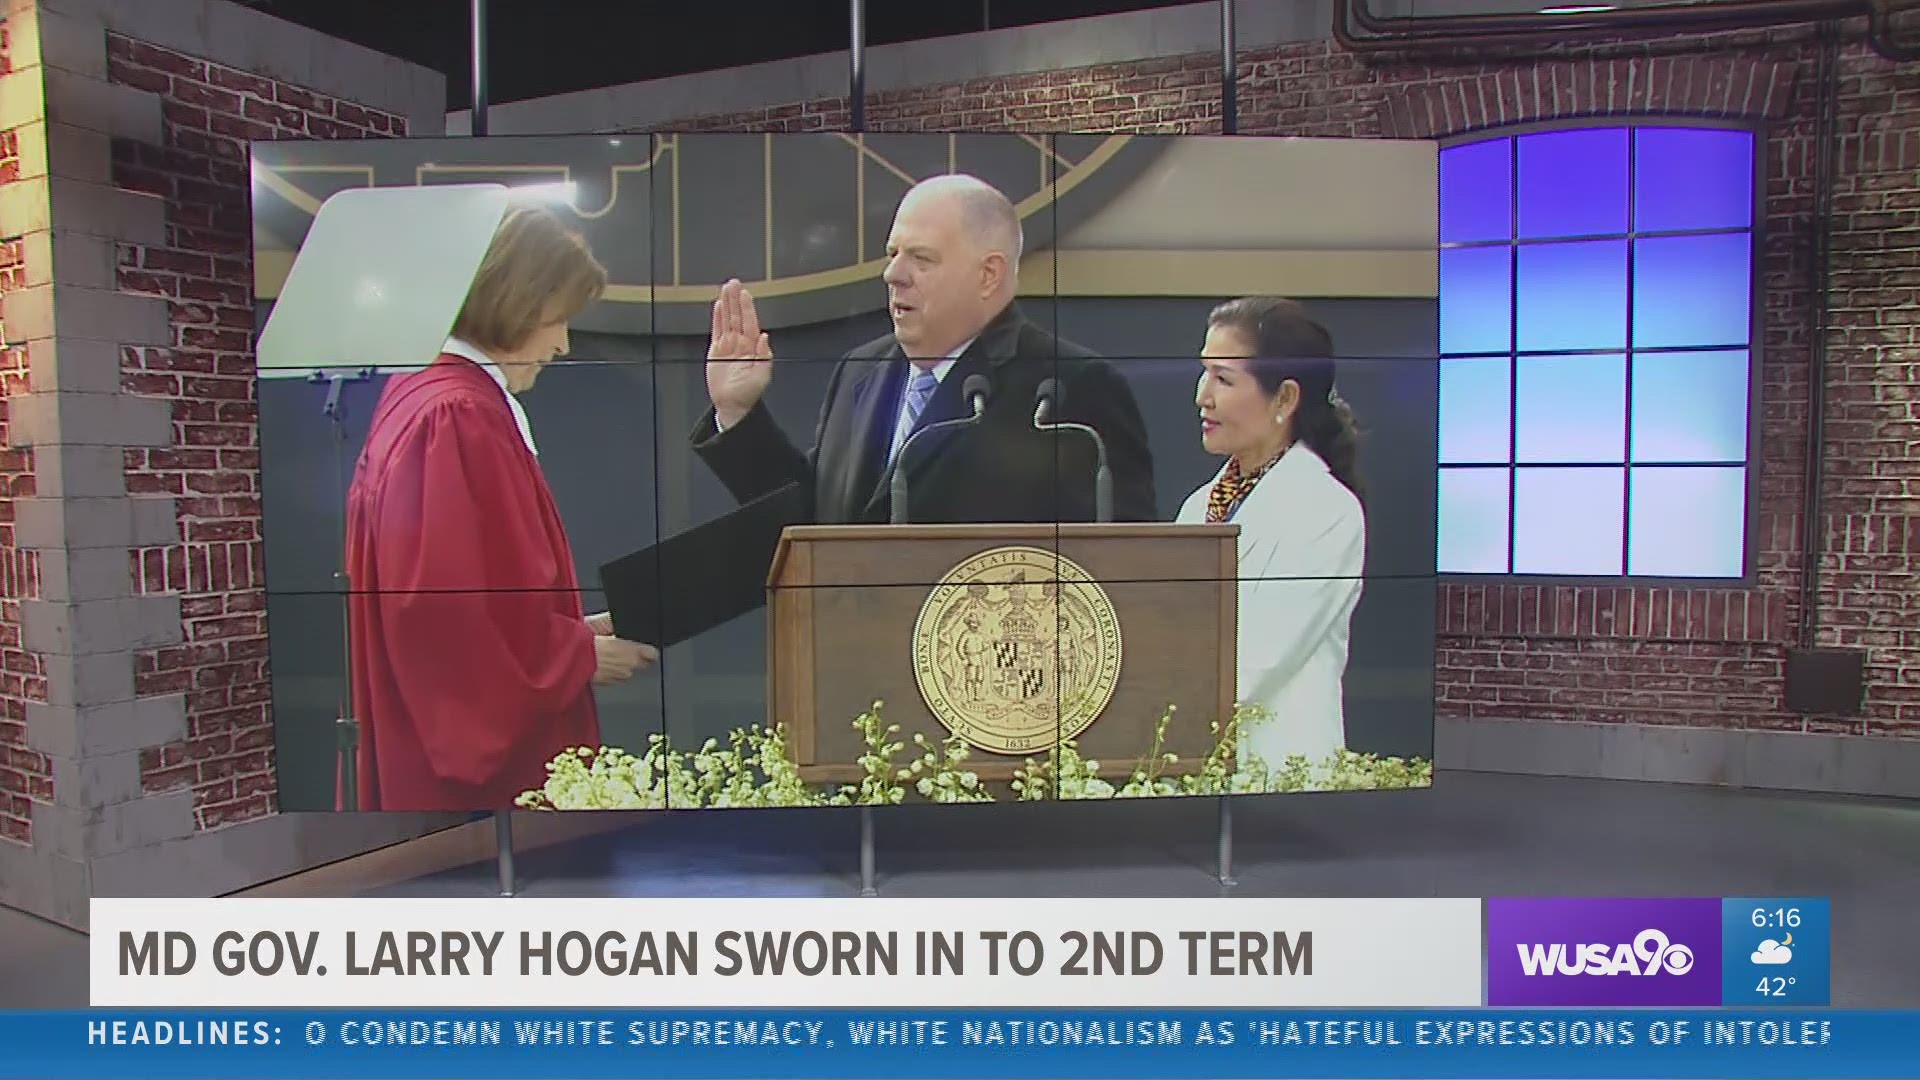 "Let's repudiate the debilitating politics, practiced elsewhere including just down the road in Washington, where insults substitute for debate," Hogan said.